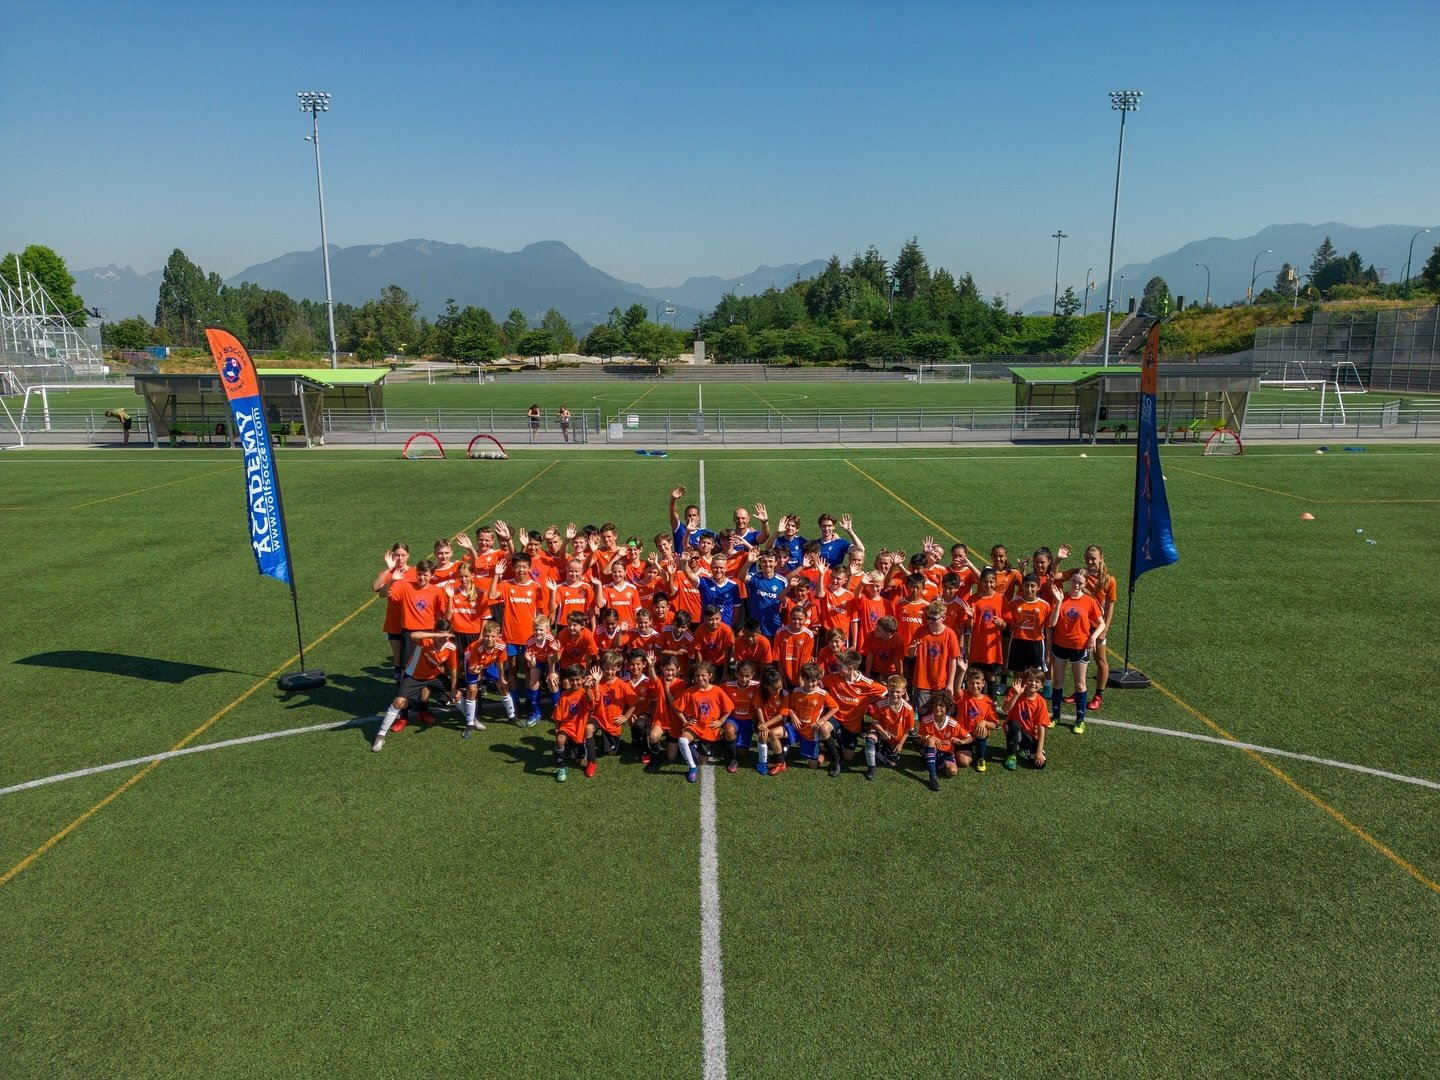 🔶 SUMMER CAMPS 2024 - VANCOUVER 🔷

SKILLS &amp; BALL TECHNIQUE
SPEED, FOOTWORK &amp; BALANCE
ONE FAMILY, SHARED DREAMS

Get ready for the best soccer experience ⚽🔥

Sign up now through link in bio - volfsoccer.com 
#morevolf #moreskills 
&bull;
&b